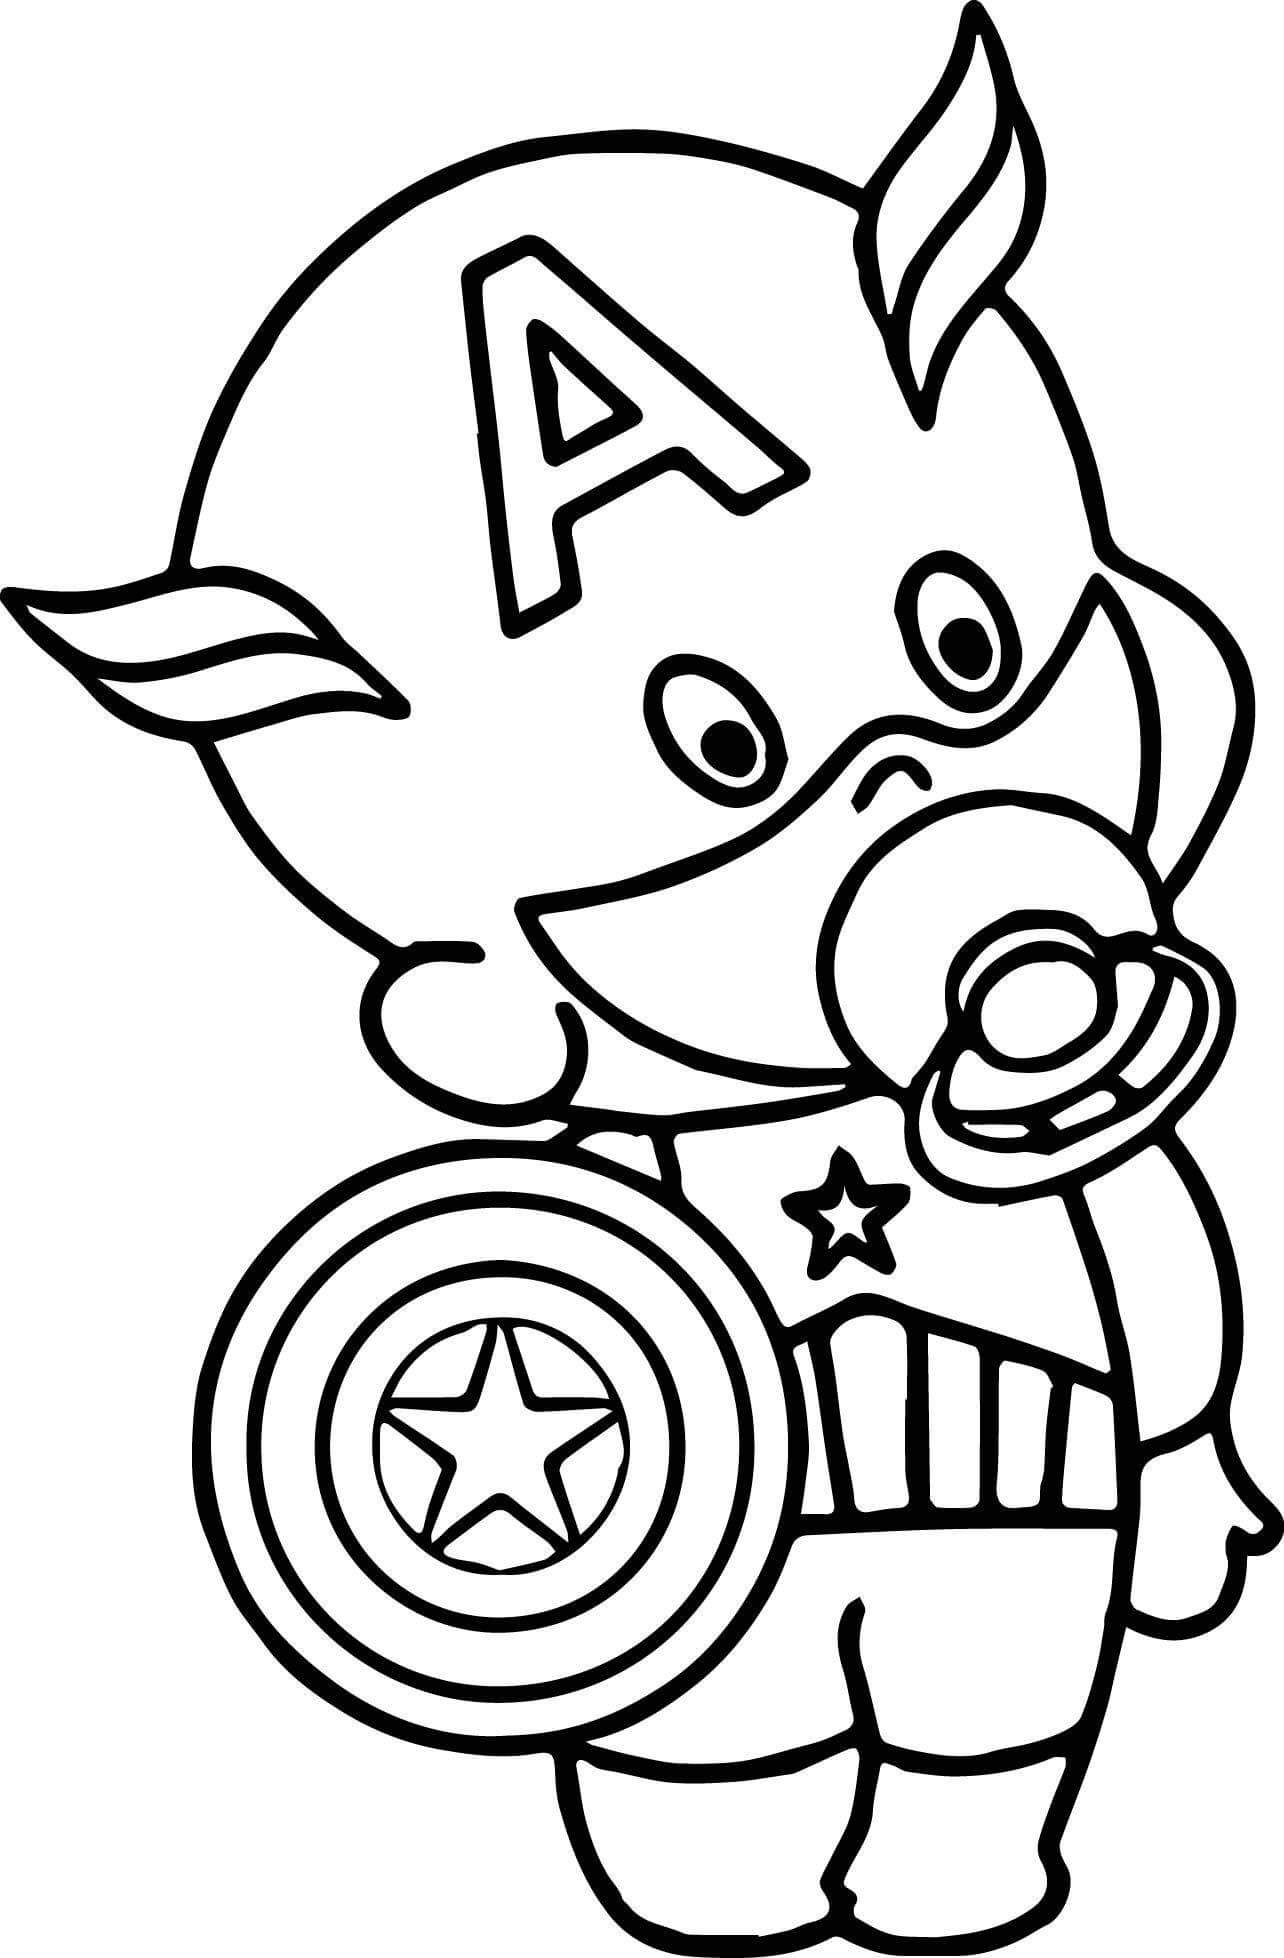 Captin america coloring pages - chargeapo